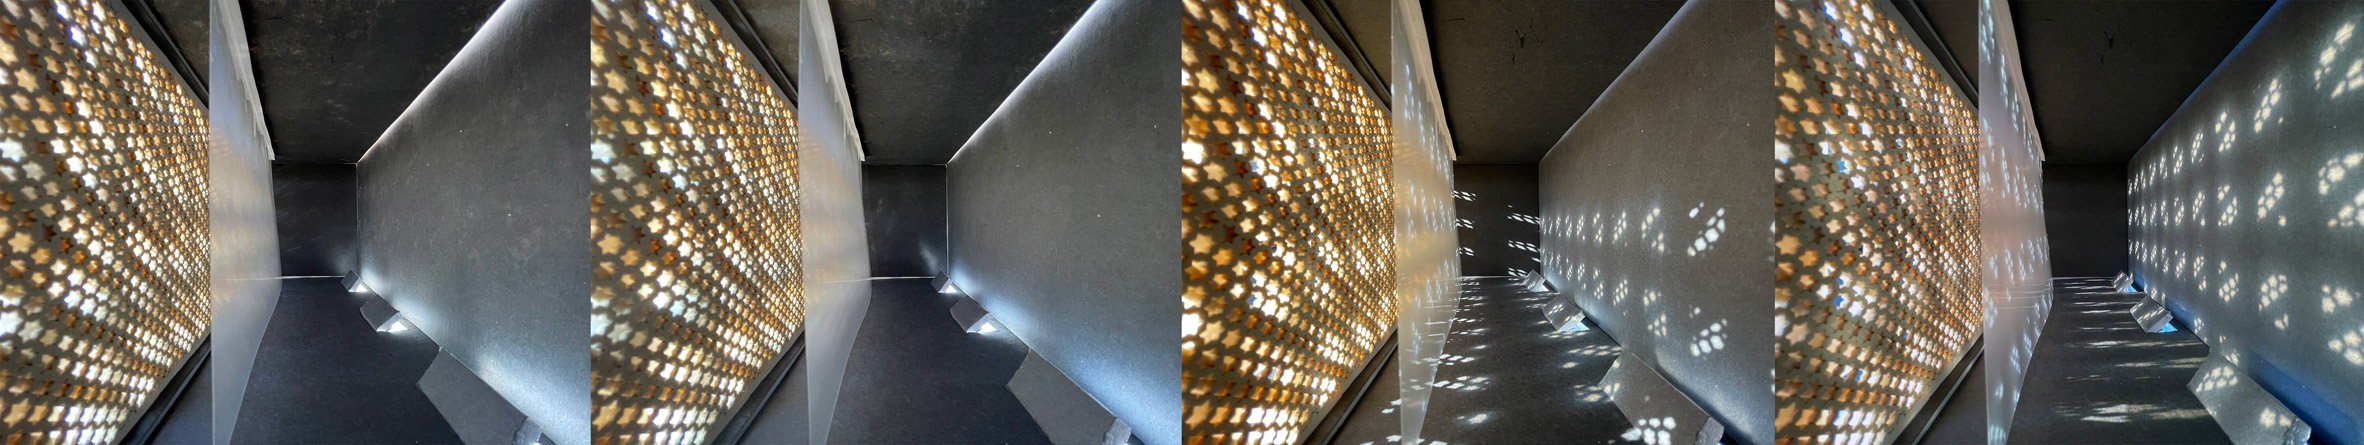 Series of four images of light shining through a perforated wall in different patterns